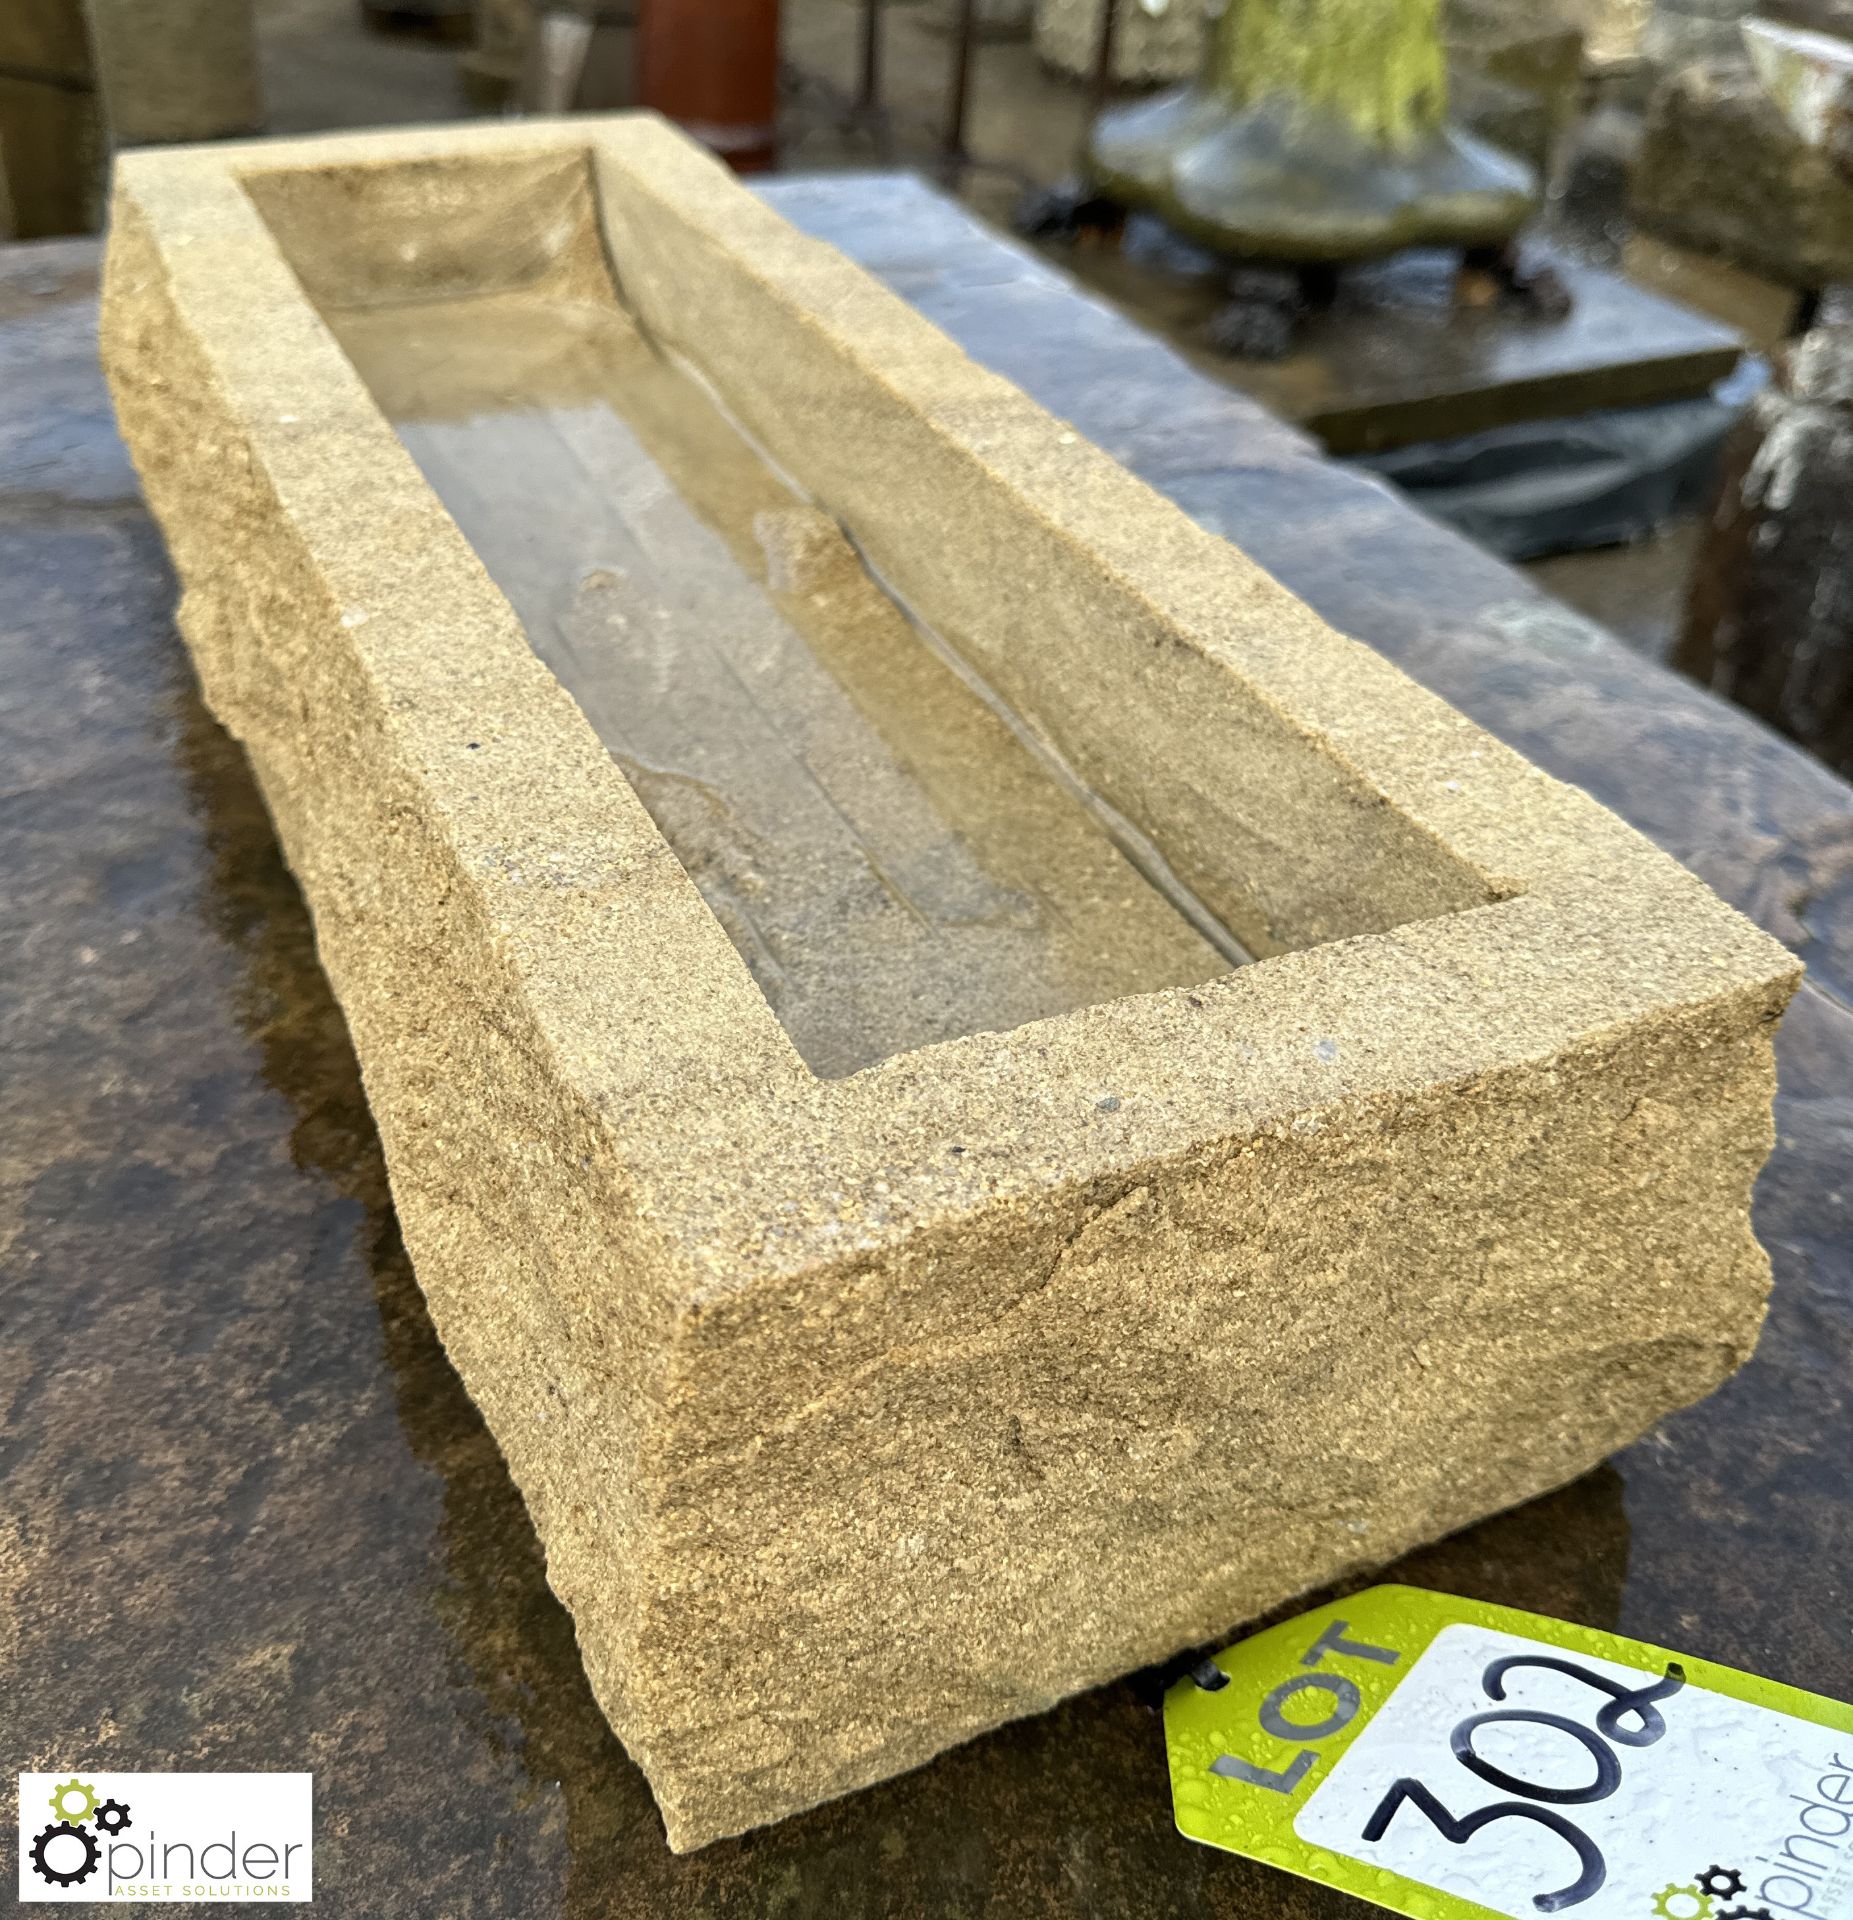 A new carved Yorkshire stone oblong Planter, approx. 5in x 8in x 23in (paired with lot 304) - Image 2 of 3